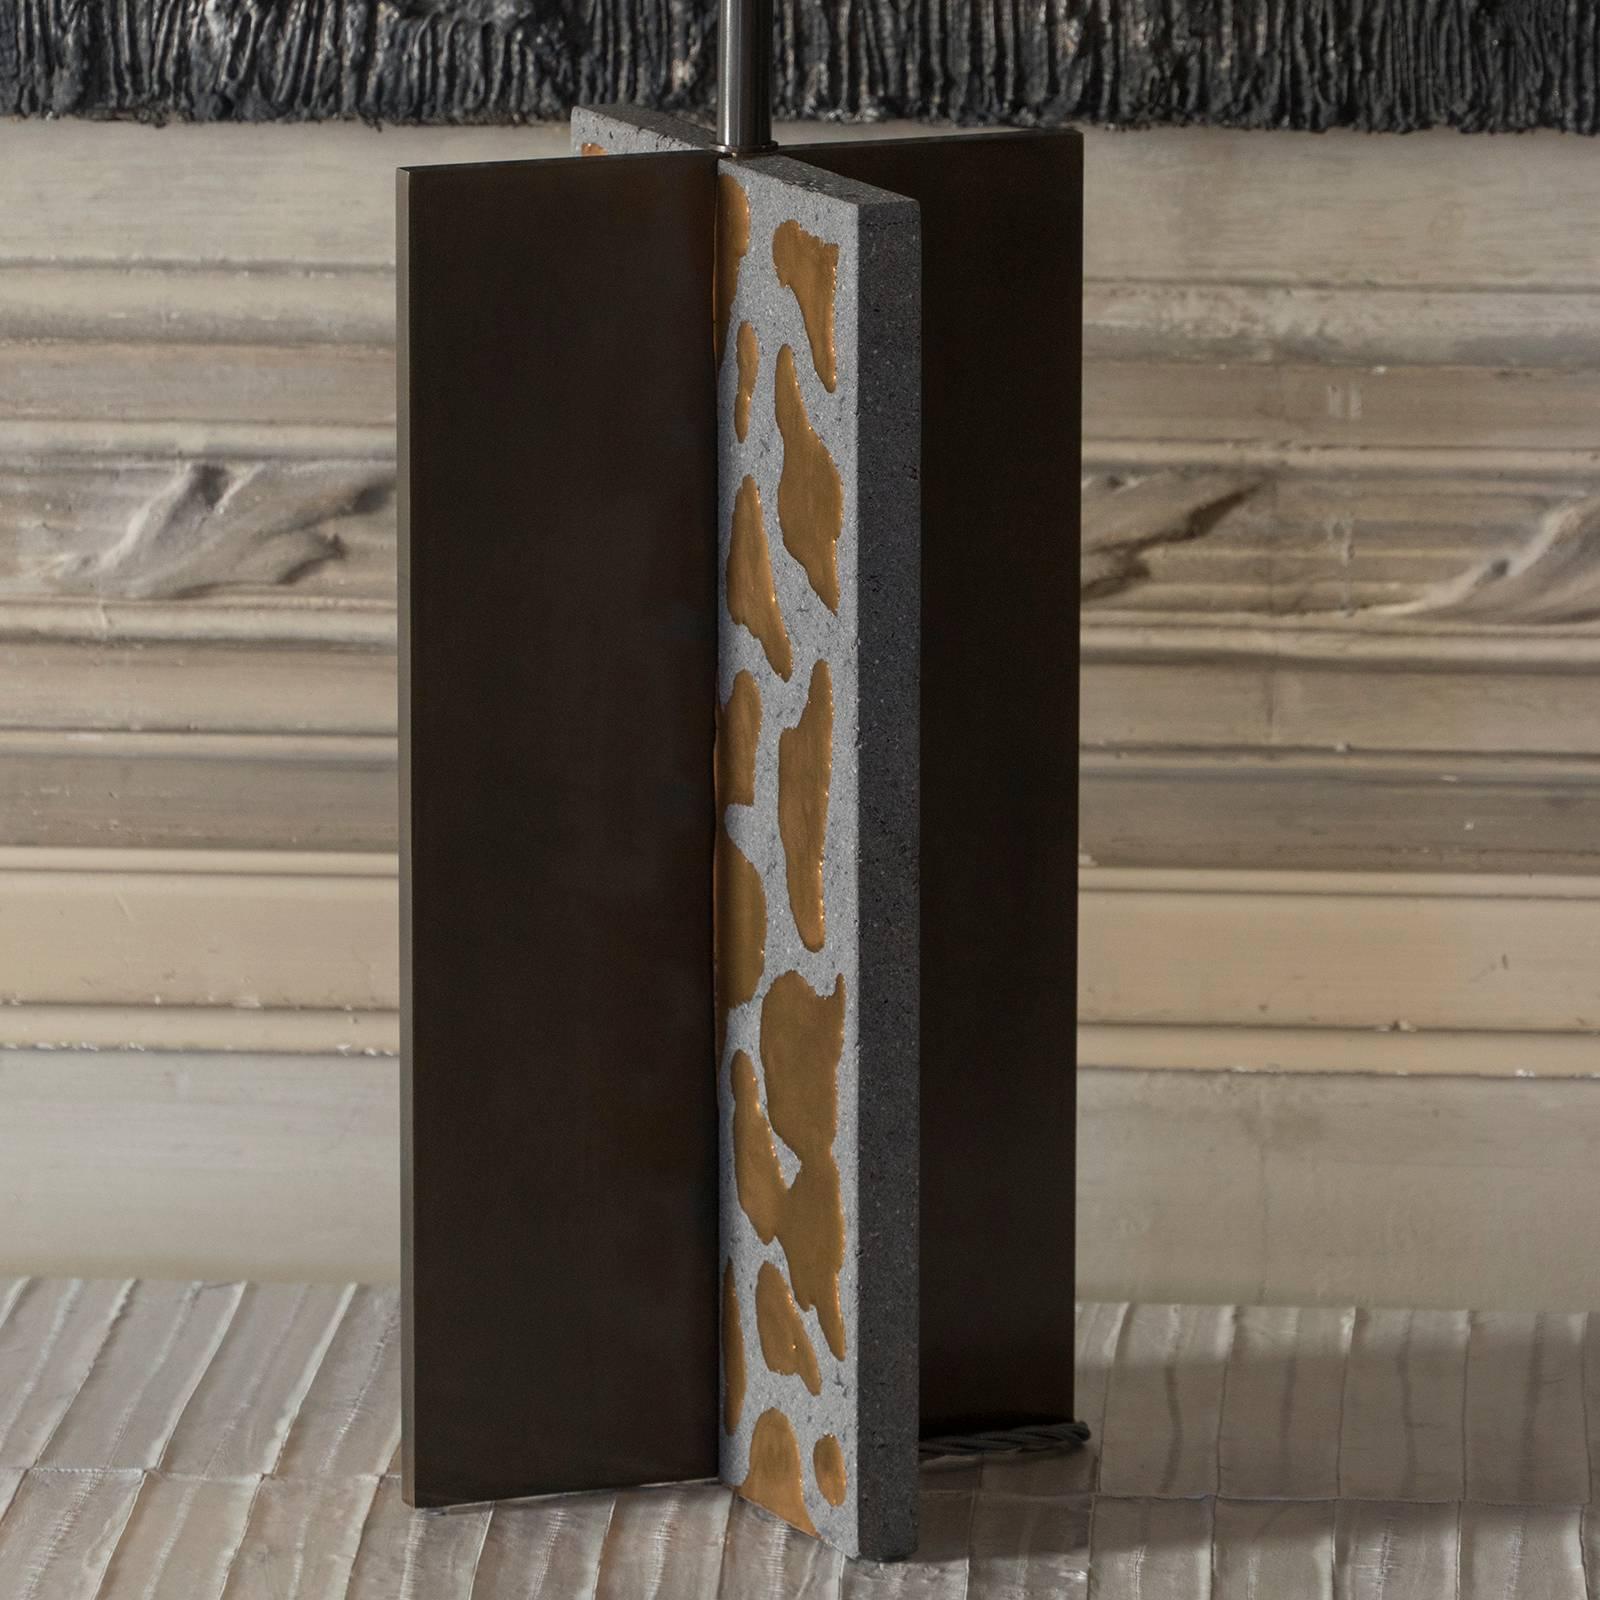 Contemporary table lamp in Basaltina stone with resin details and solid brass with bronze finishing, lamp measure: H 57 cm lampshade 45 cm x H 30.